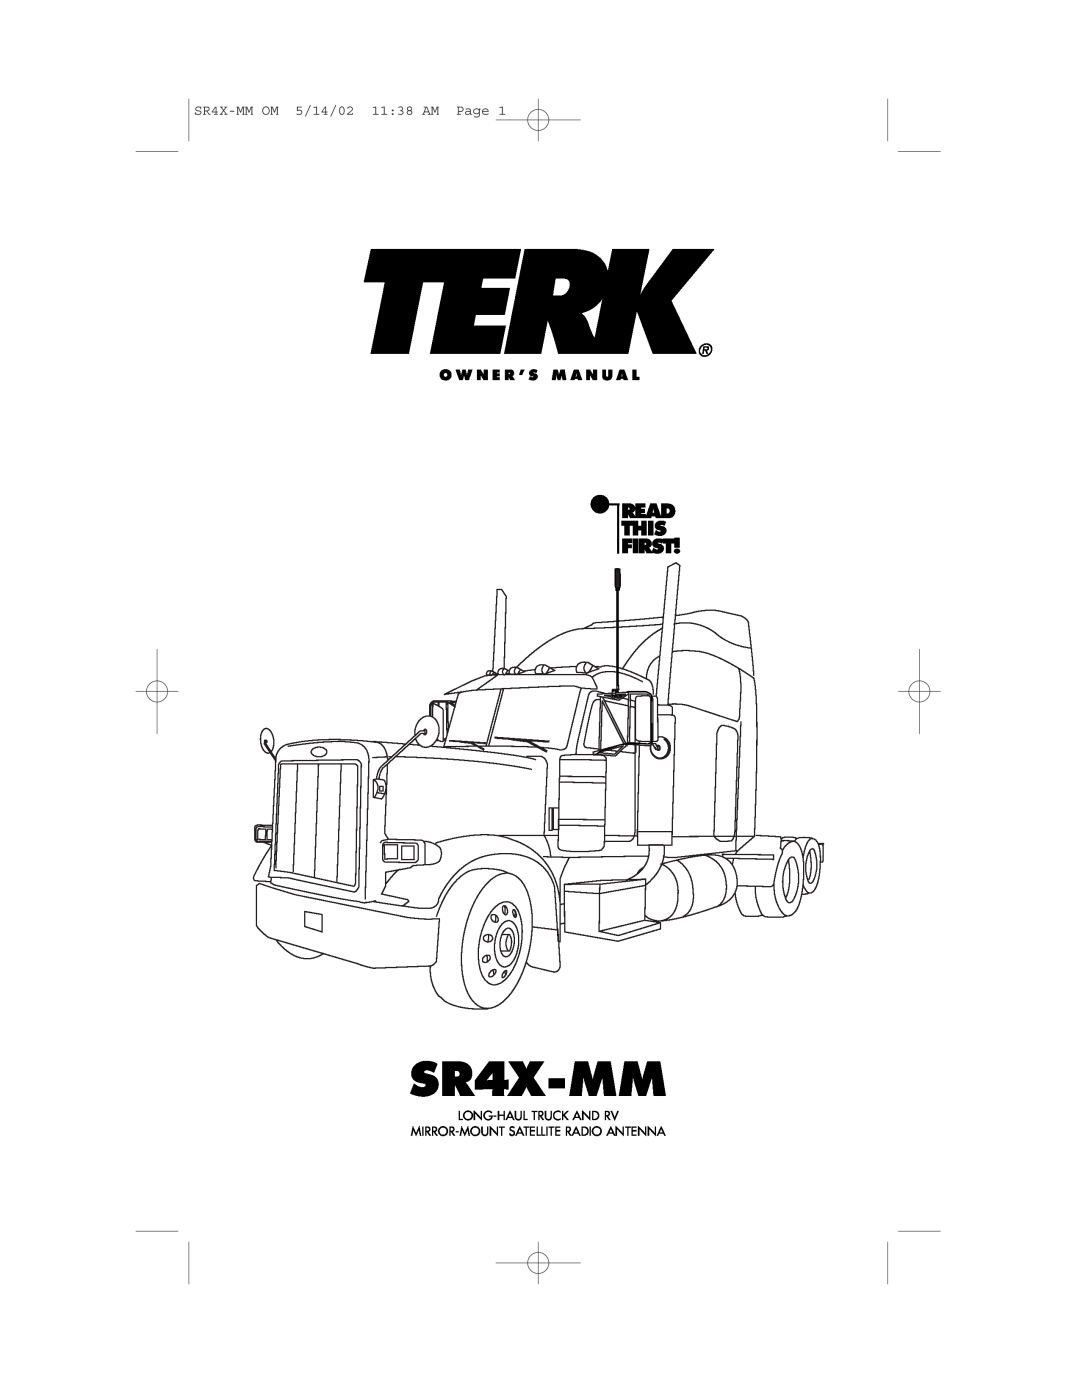 TERK Technologies owner manual Read This First, SR4X-MMOM 5/14/02 11 38 AM Page, O W N E R ’ S M A N U A L 